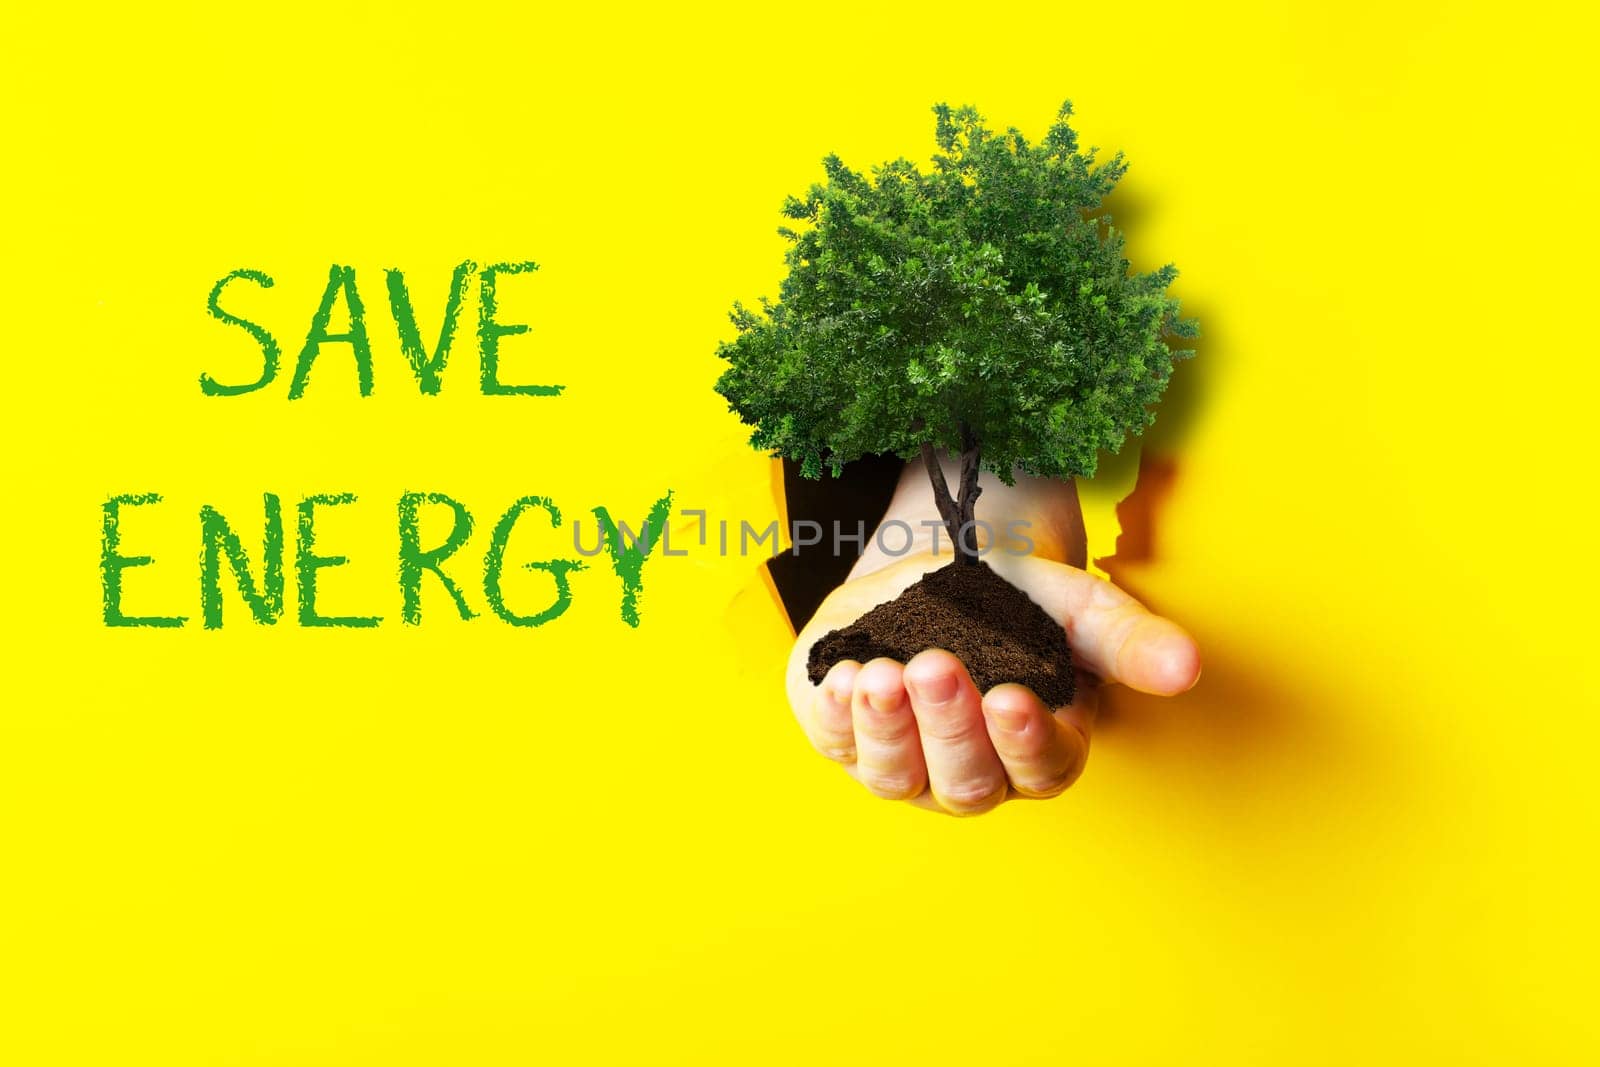 A hand holding a tree in front of a yellow background with the words save energy written below. Concept of taking care of the environment and using renewable energy sources